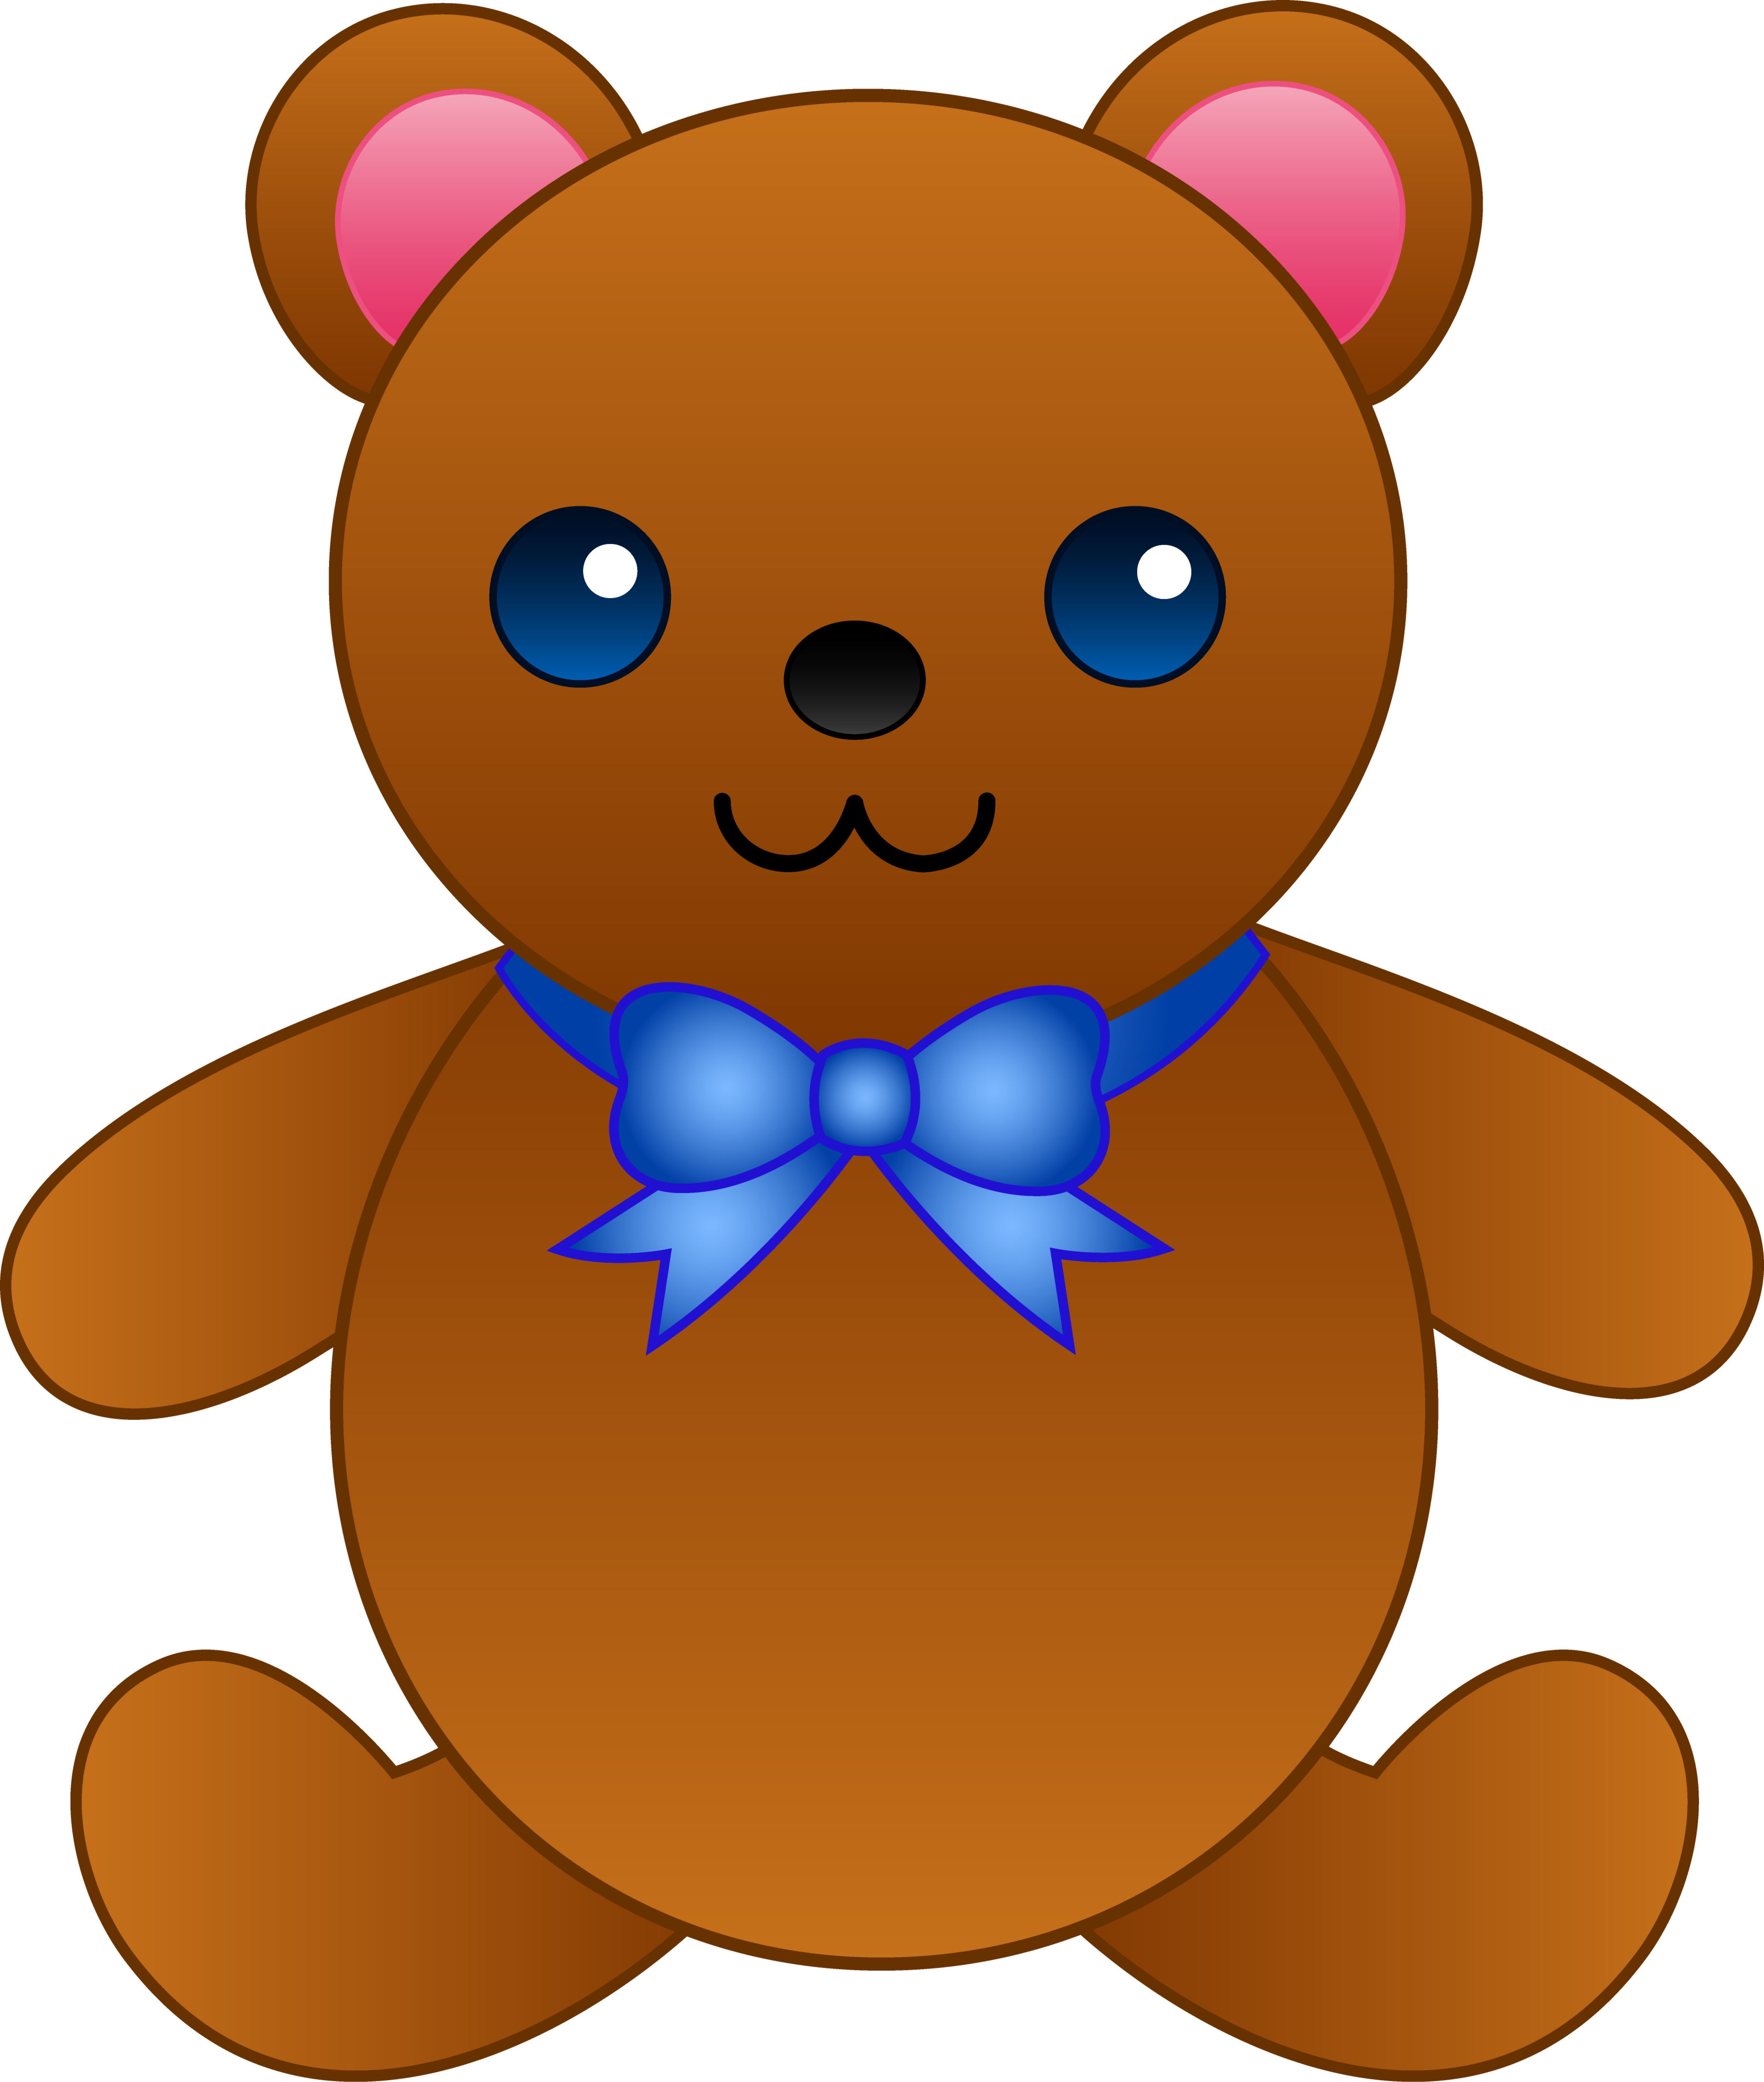 Teddy Bear Cartoon Pictures Clipart - Free to use Clip Art Resource